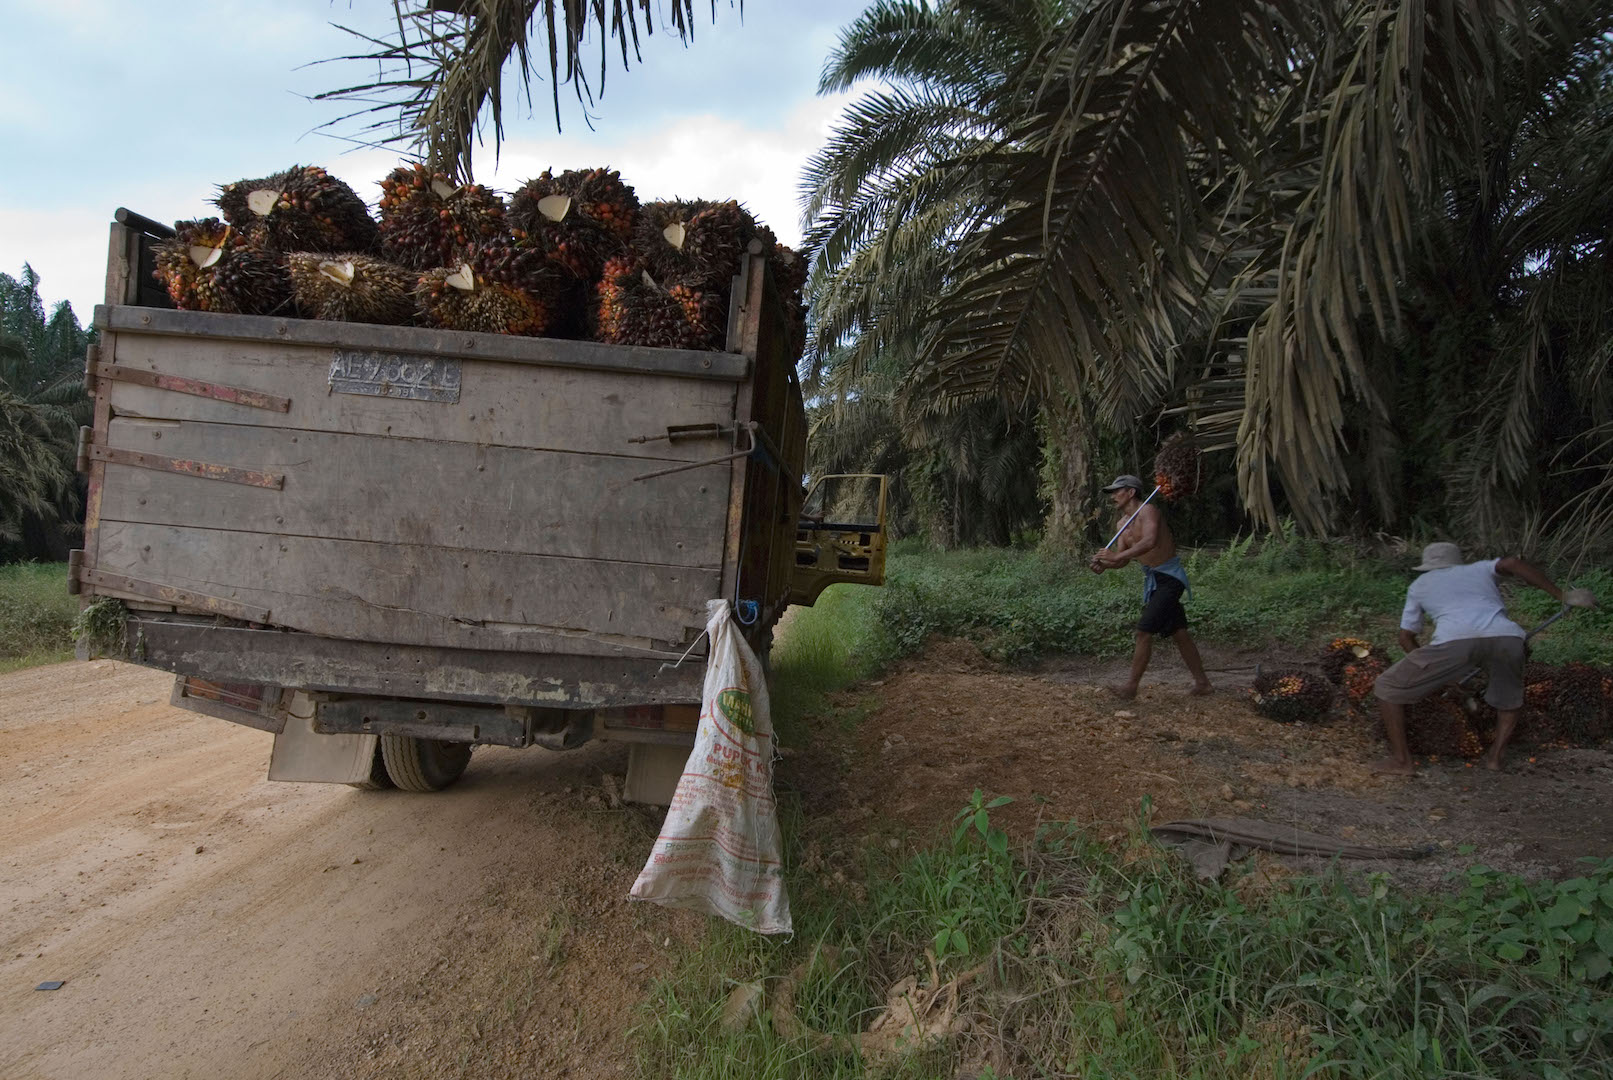 Workers in the palm oil supply chain load a lorry